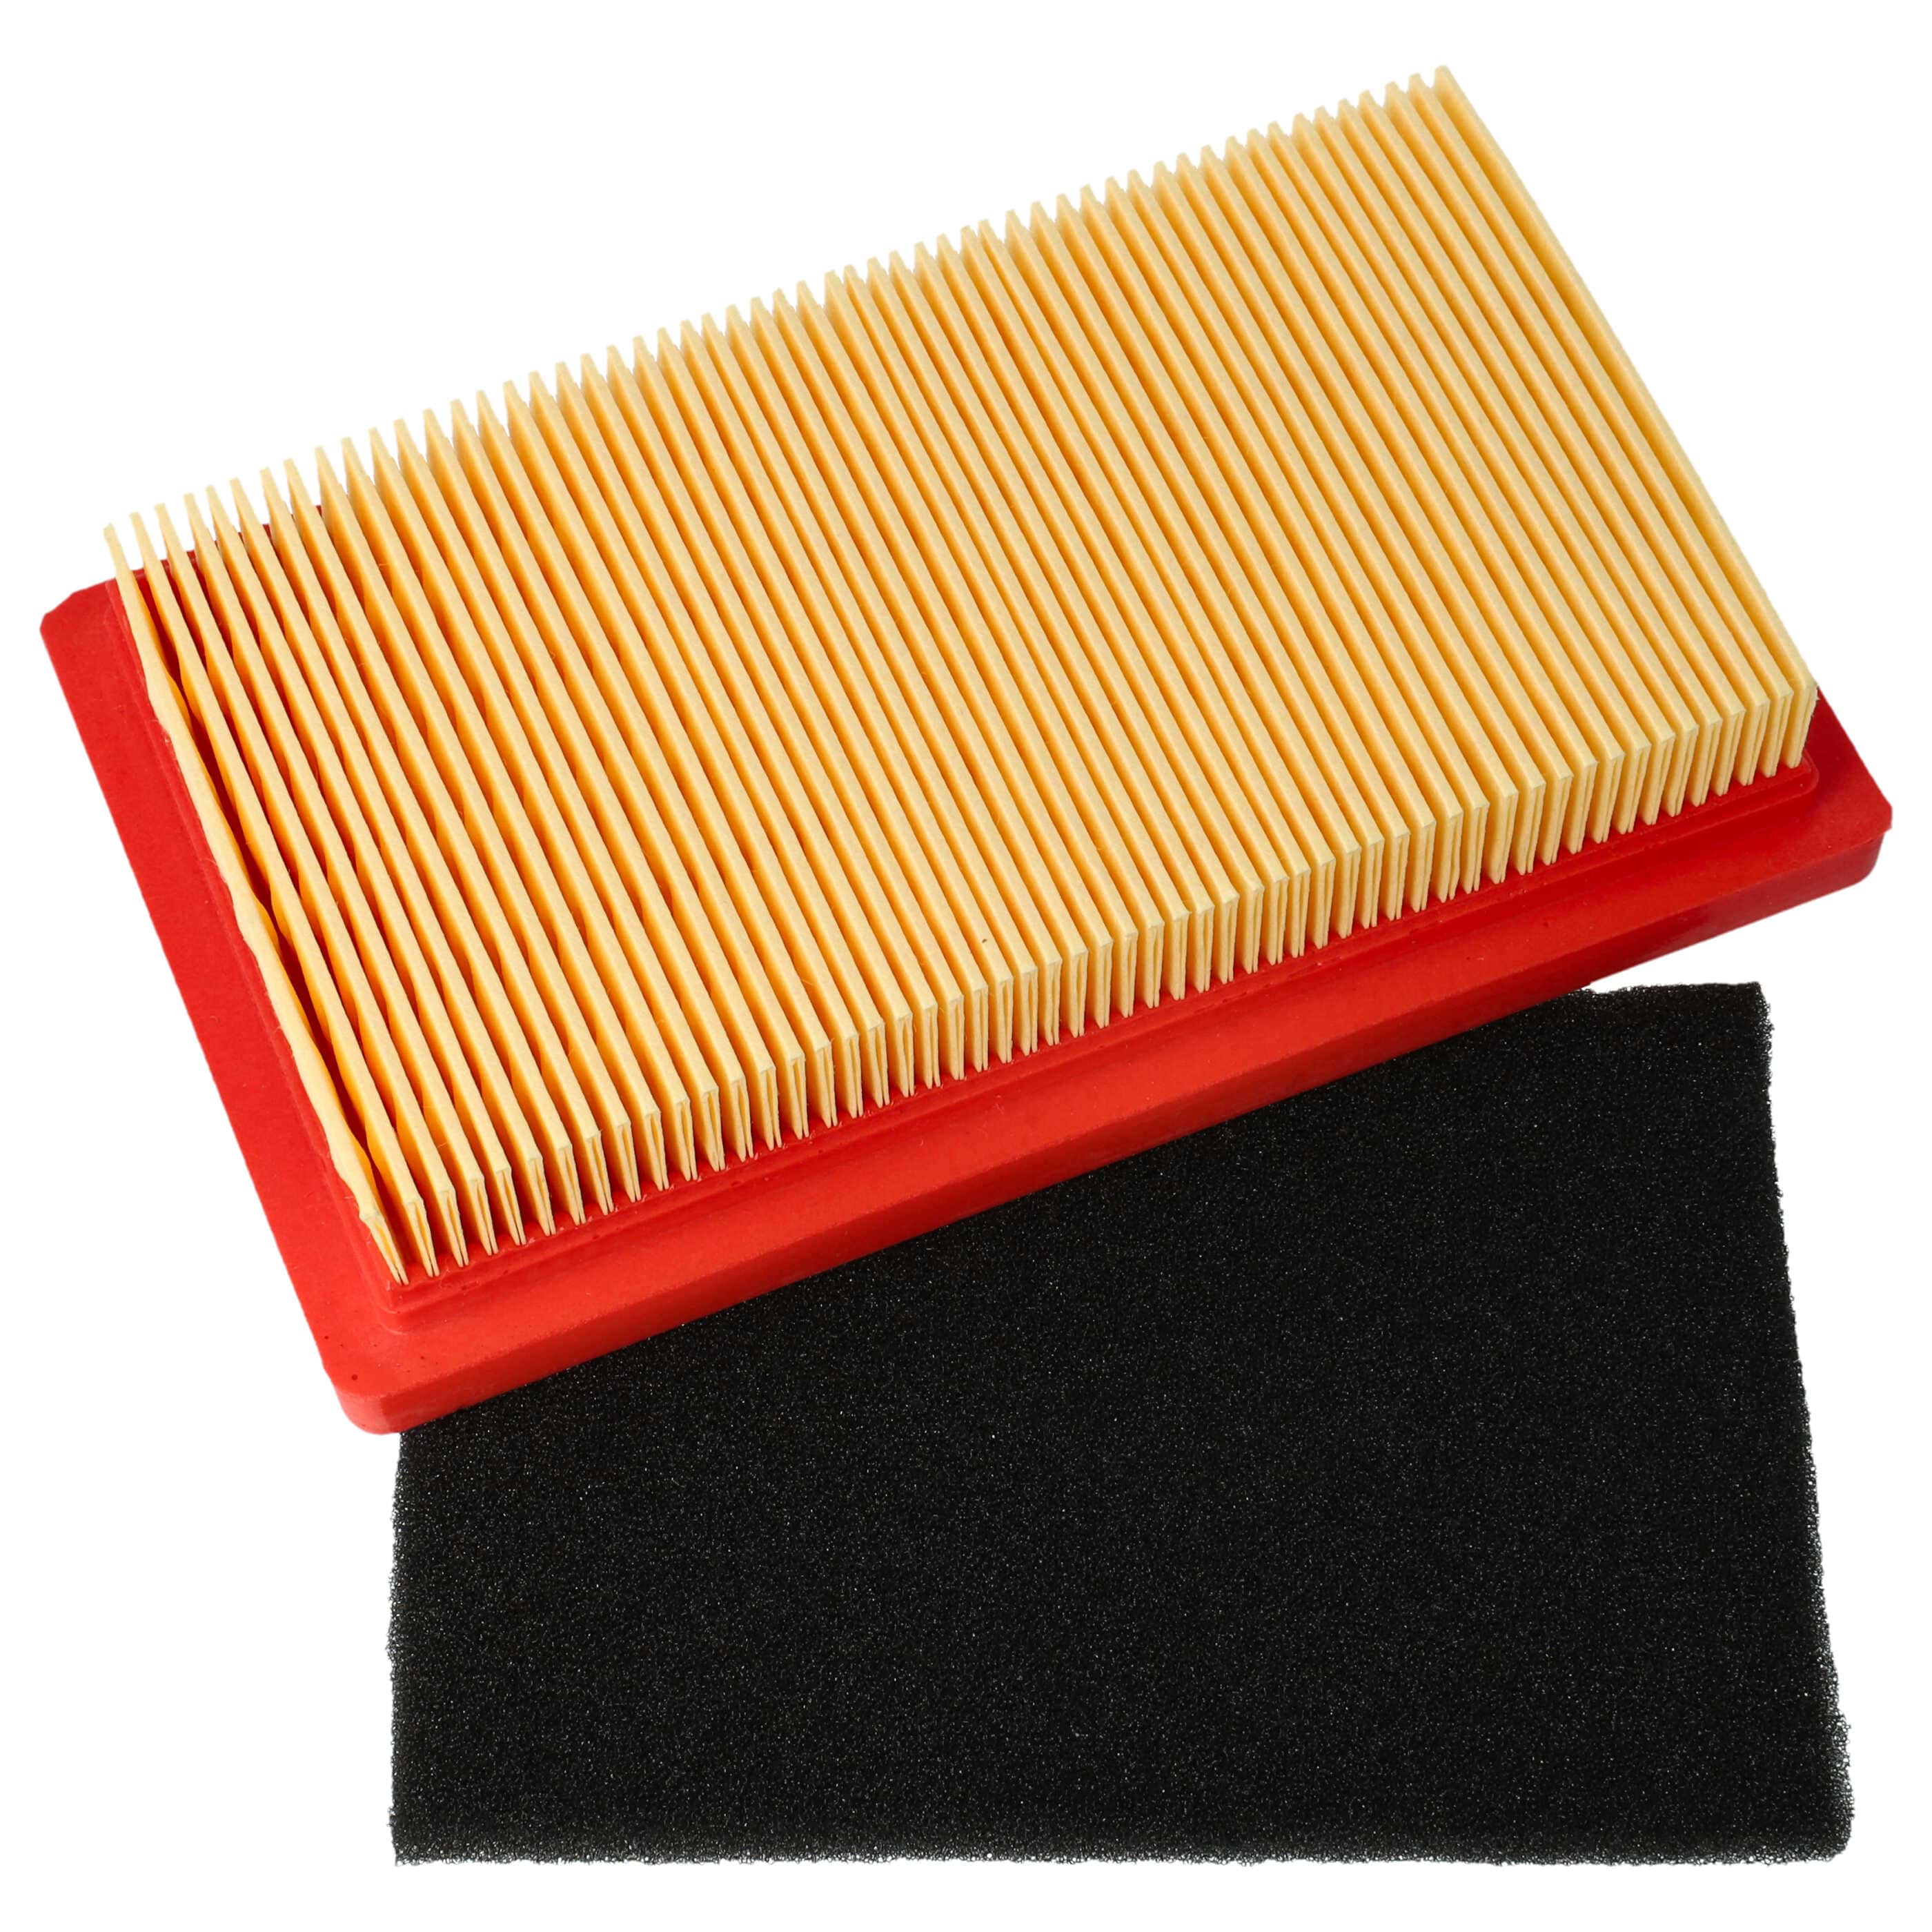 Filter Set (pre-filter, air filter) replaces Arnold 3011-M6-0001 for Lawn Mower